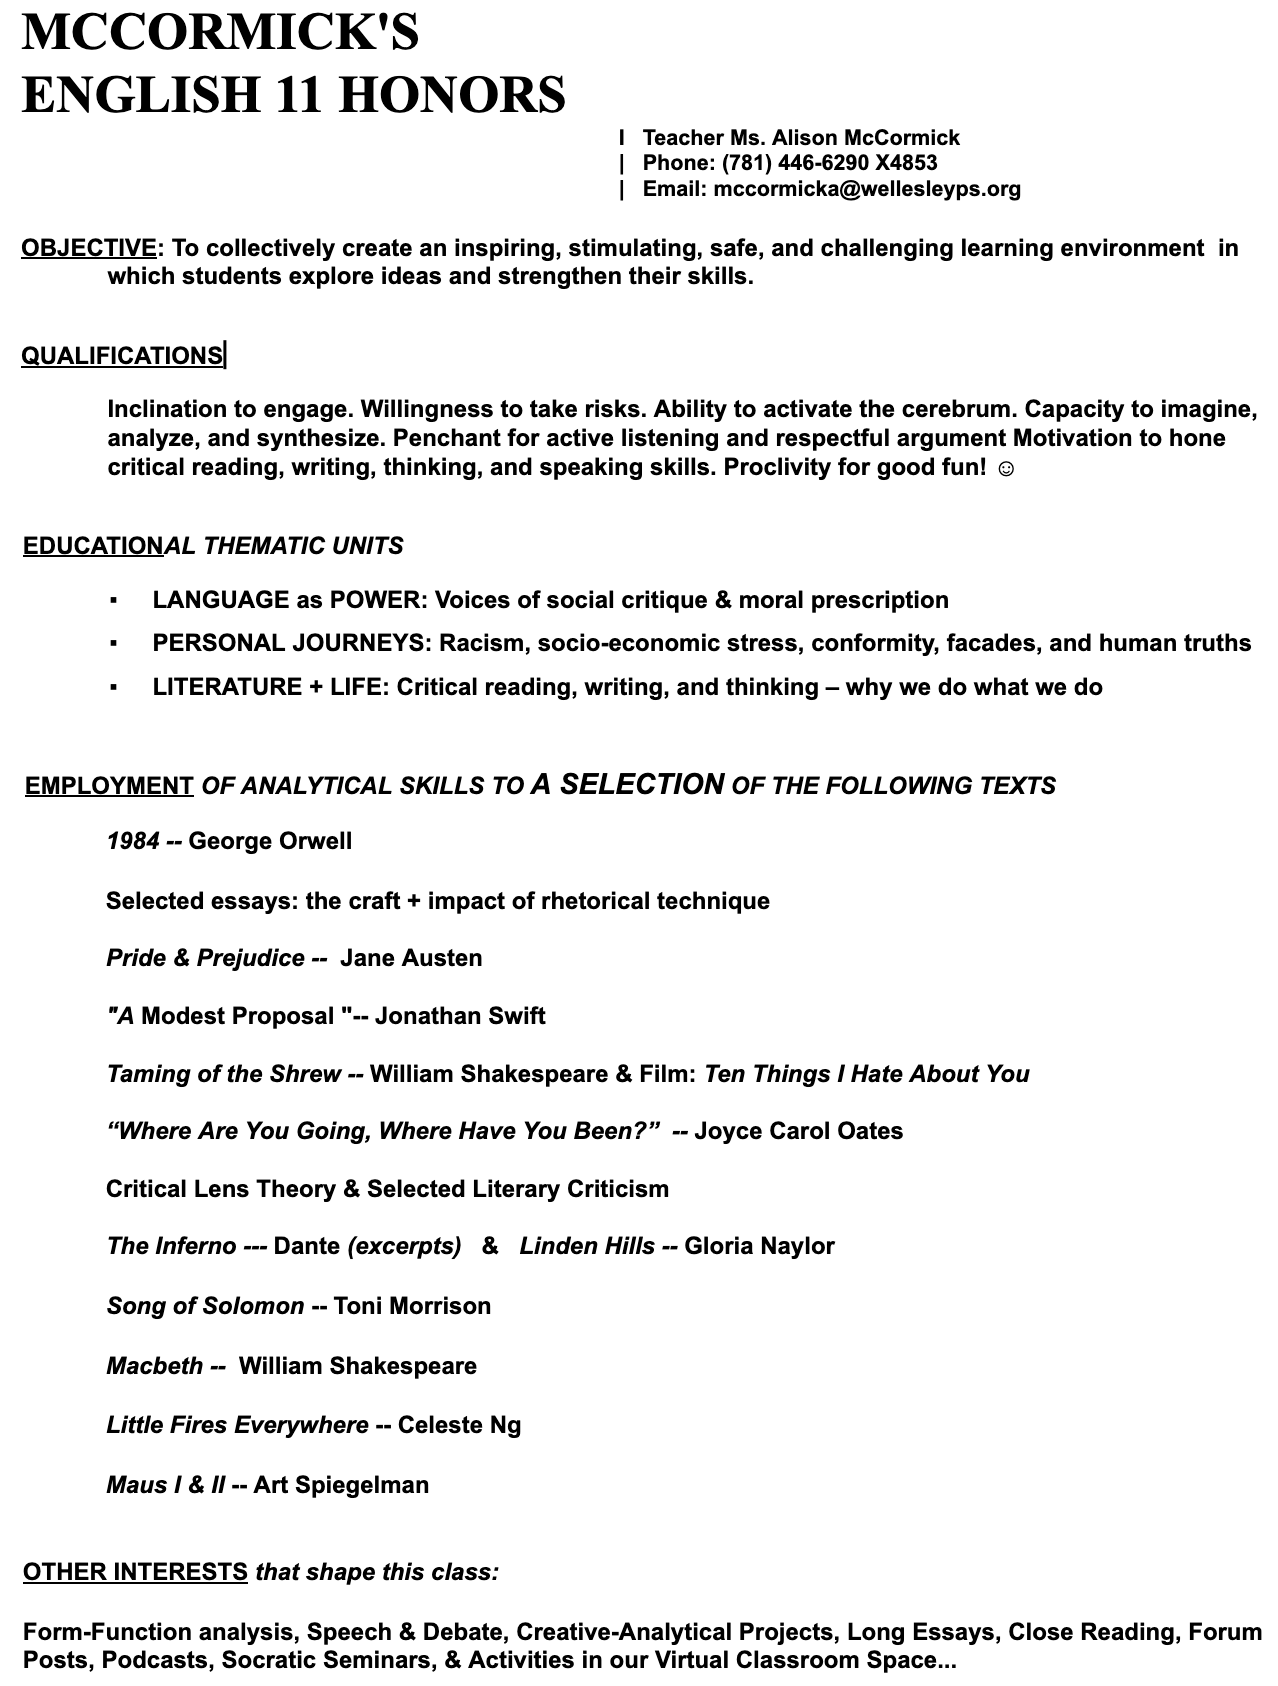 Syllabus as a CV. (If not loading, try a different browser; Google often works best.)